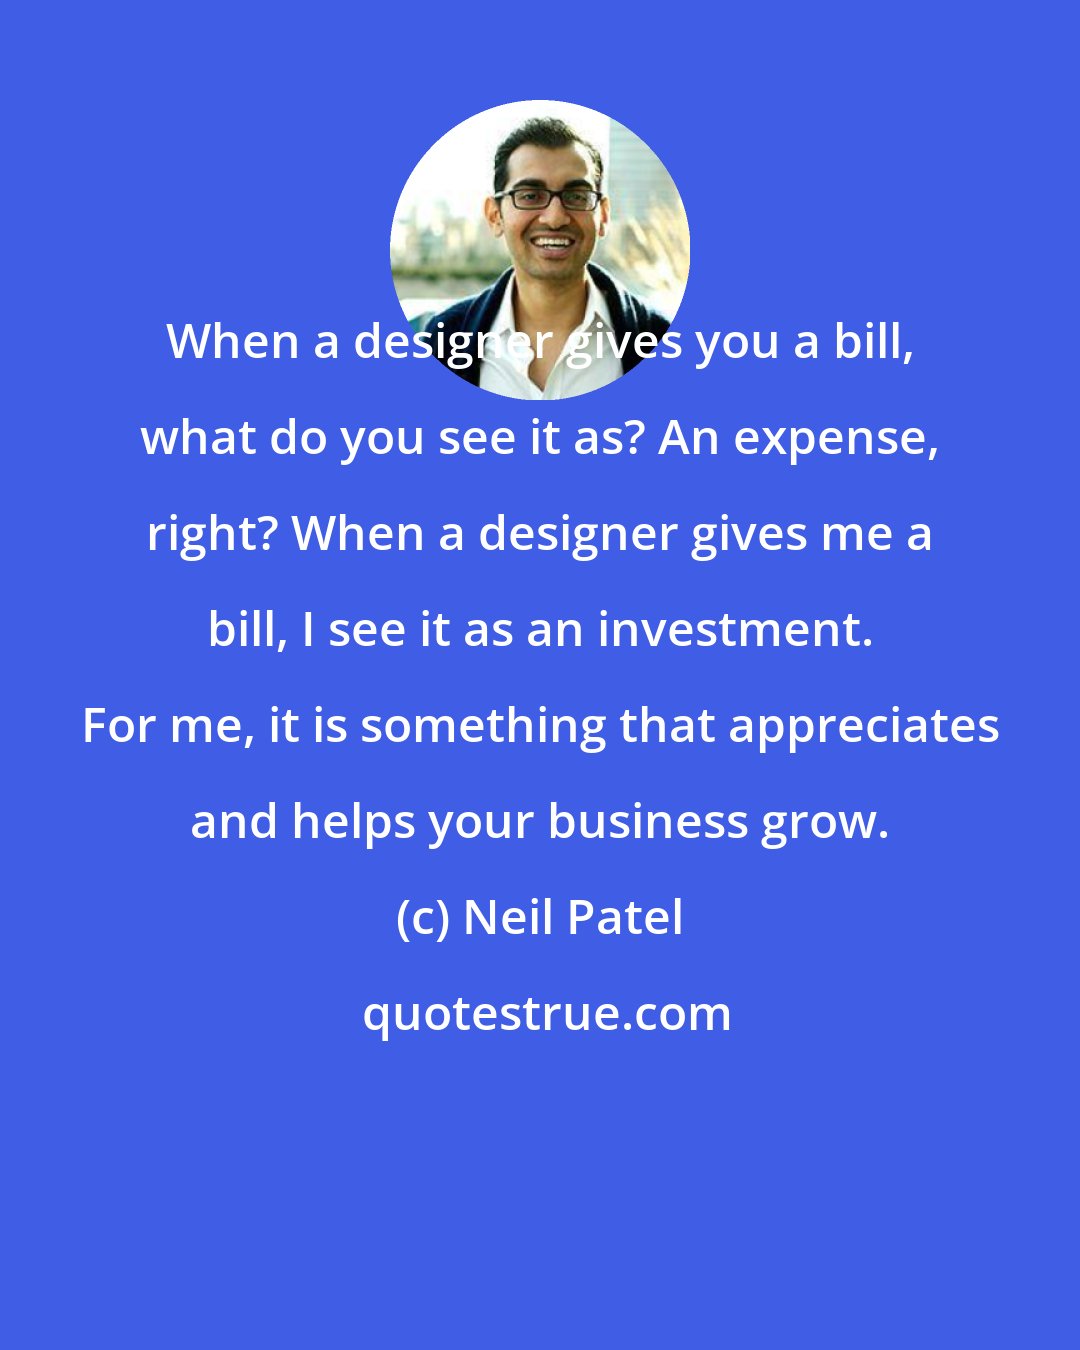 Neil Patel: When a designer gives you a bill, what do you see it as? An expense, right? When a designer gives me a bill, I see it as an investment. For me, it is something that appreciates and helps your business grow.